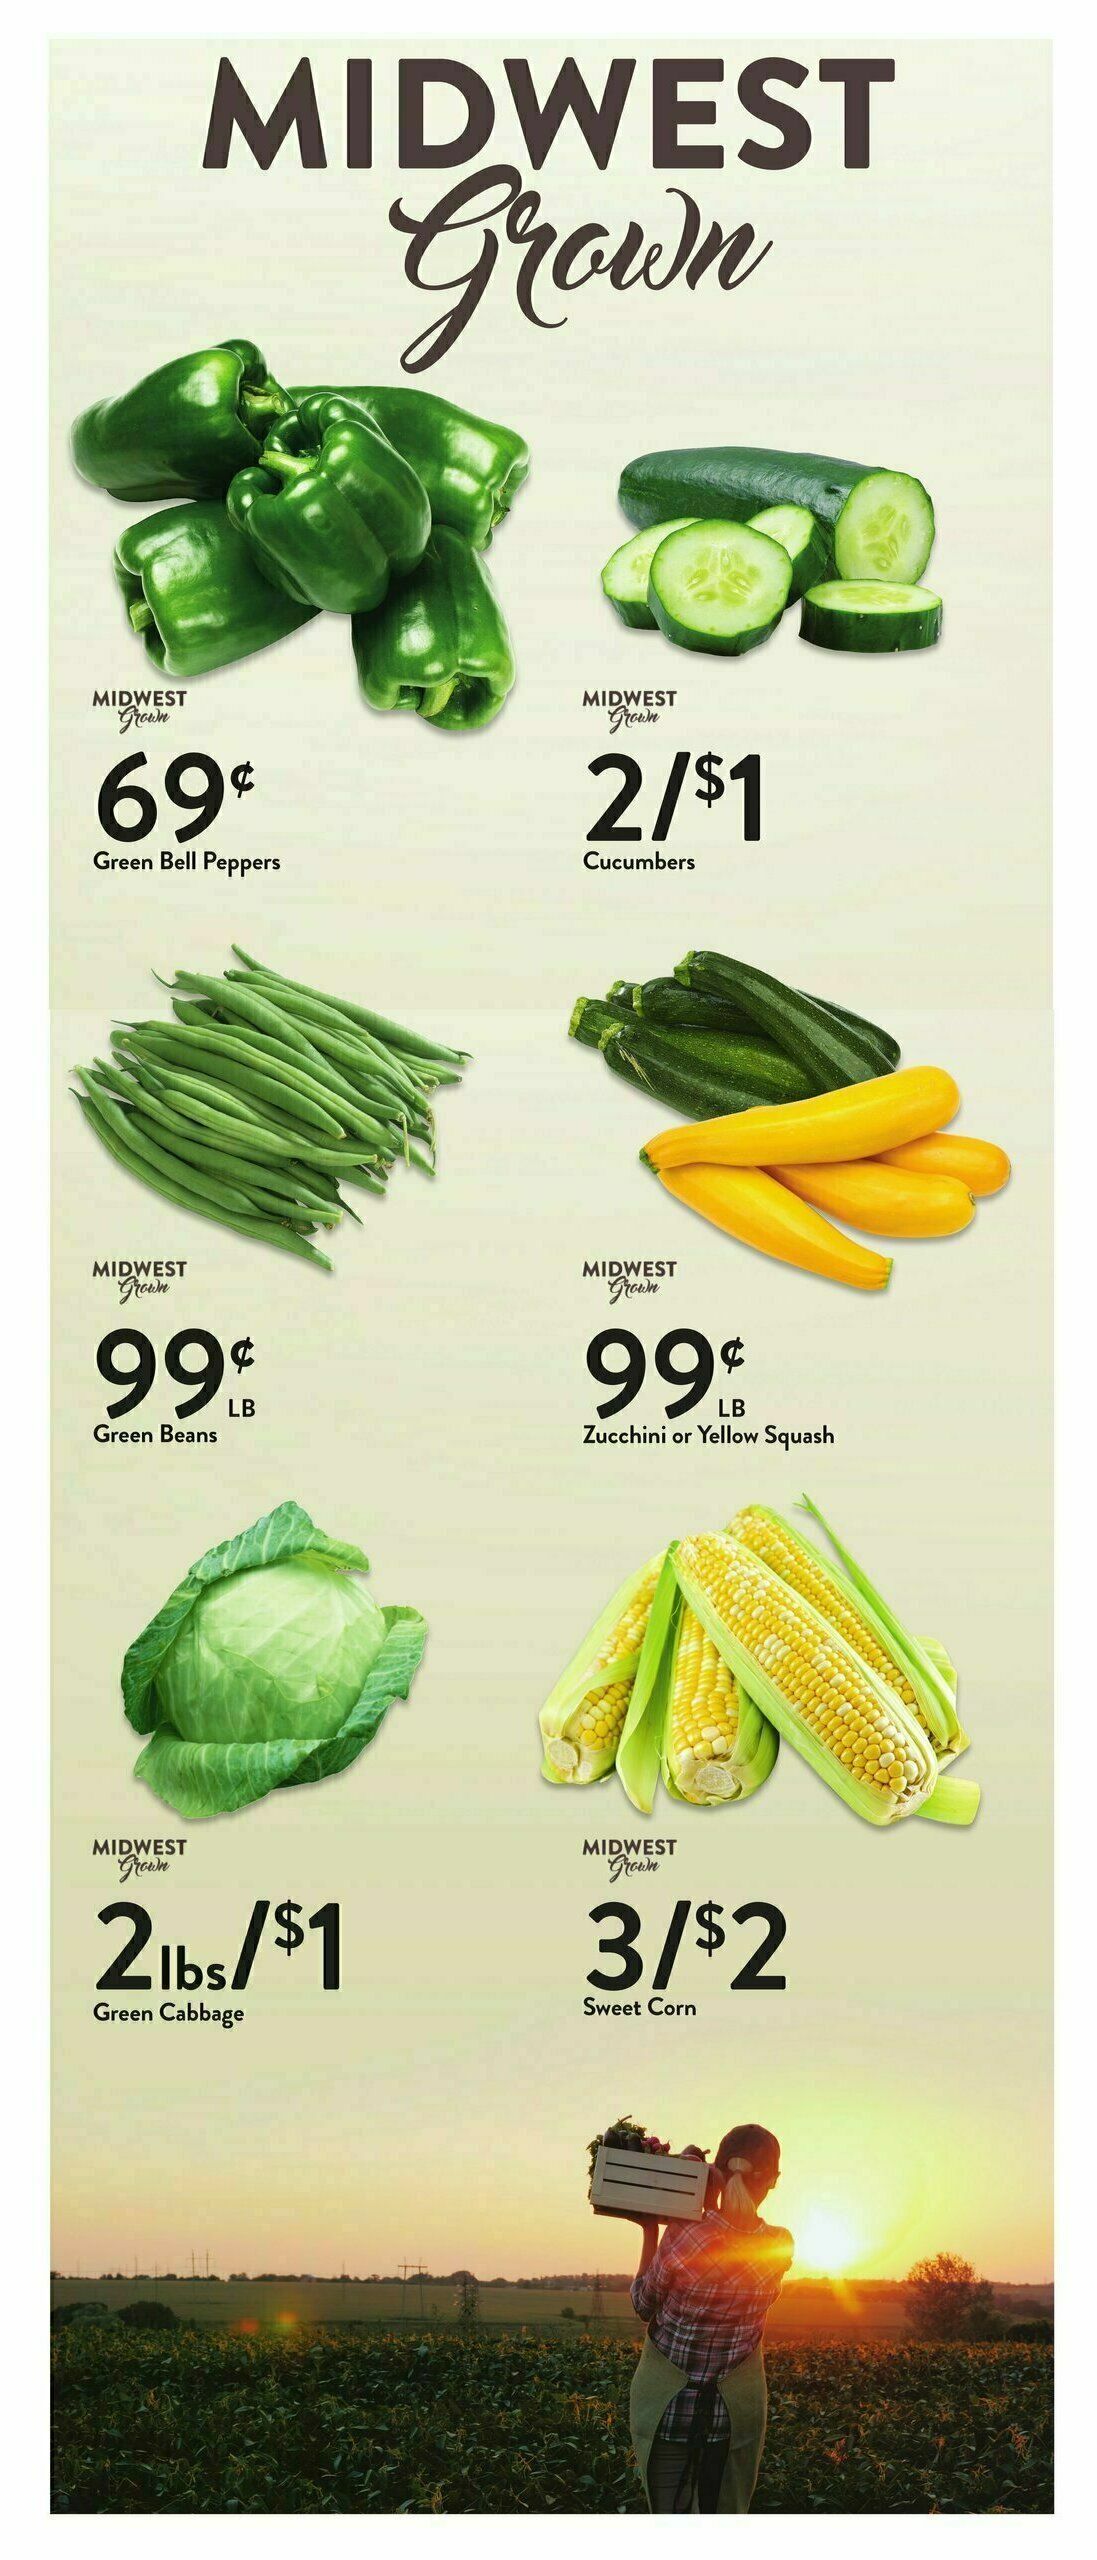 Fresh Thyme Farmers Market Weekly Ad from July 19